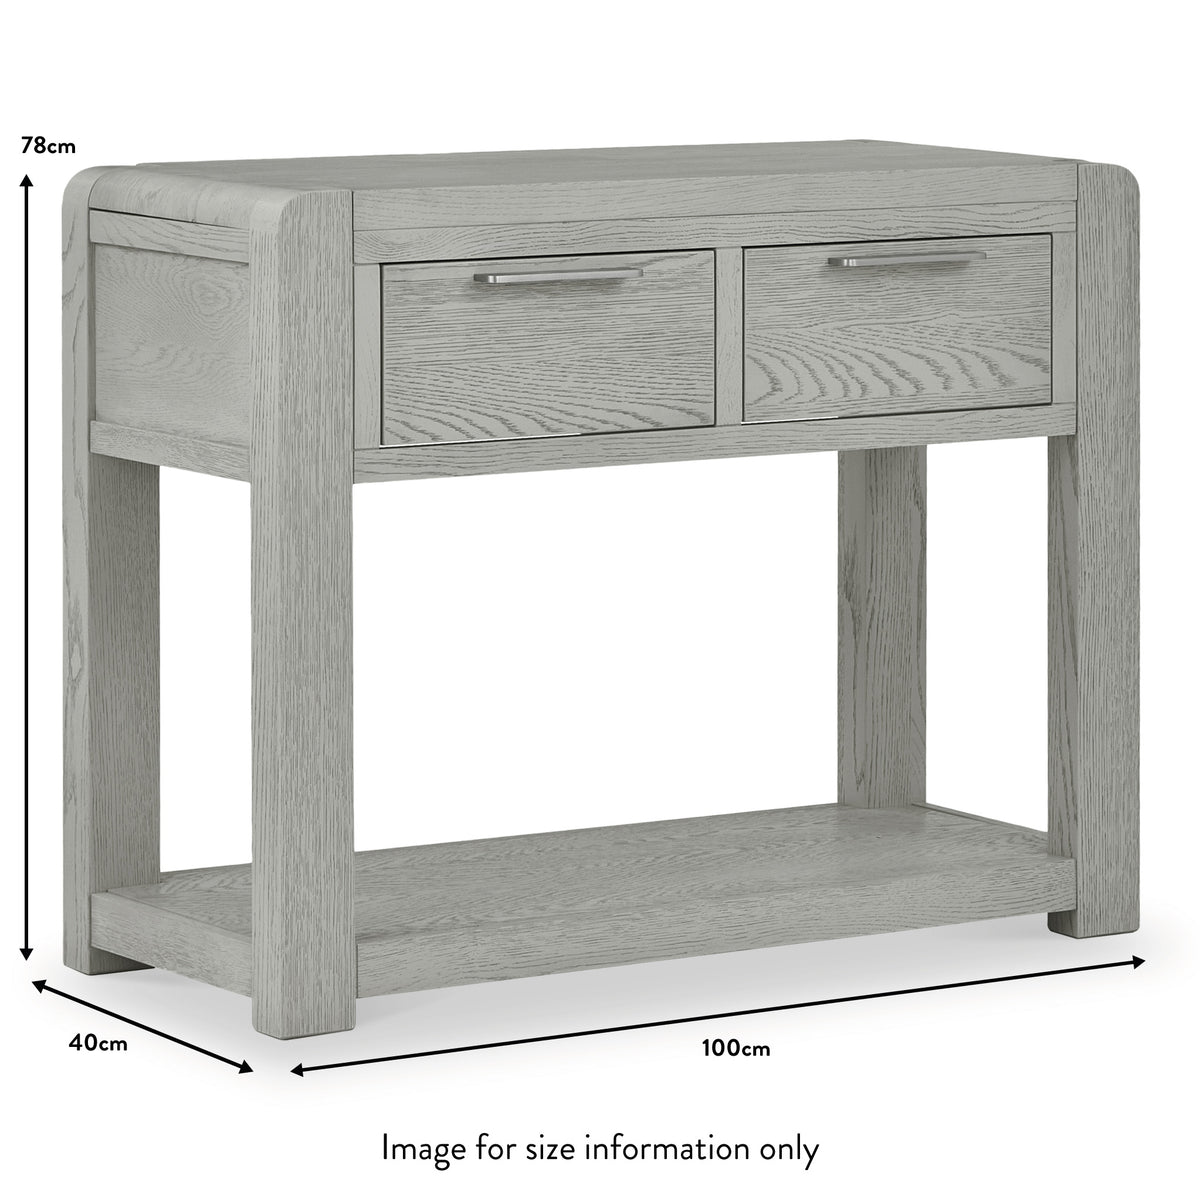 Cardona 2 Drawer Console Table dimensions